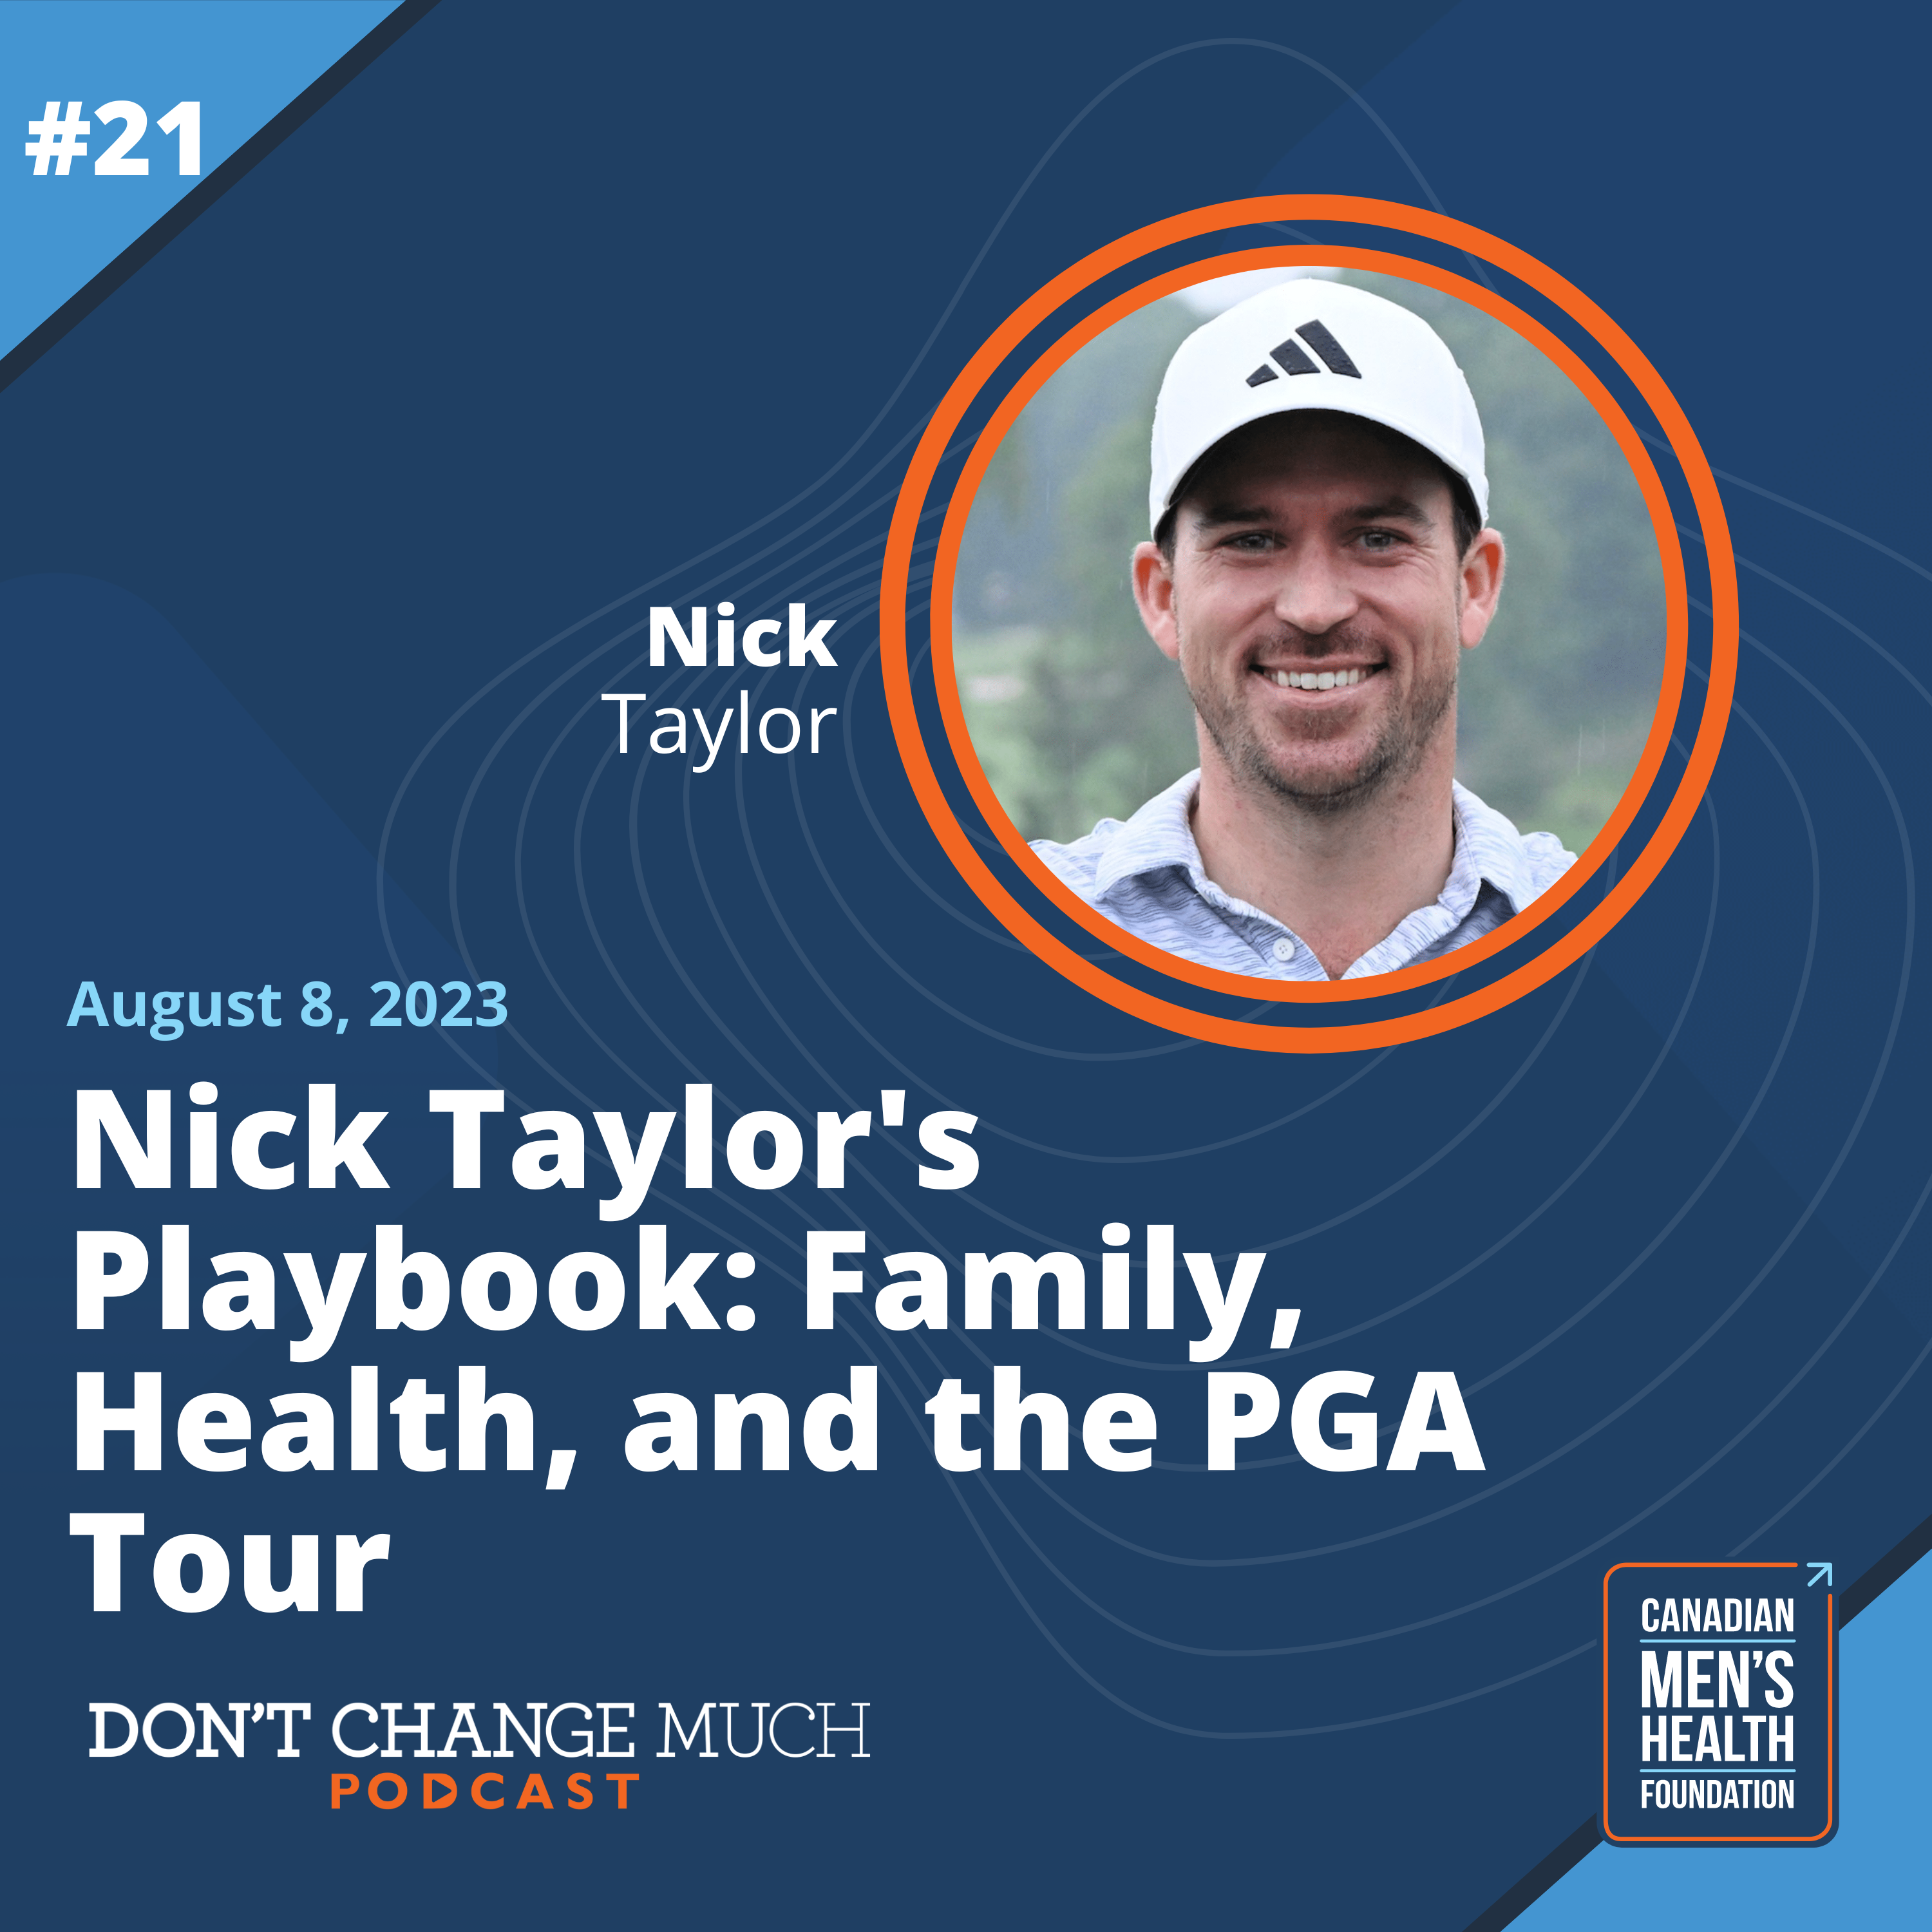 Nick Taylor's Playbook: Family, Health, and the PGA Tour